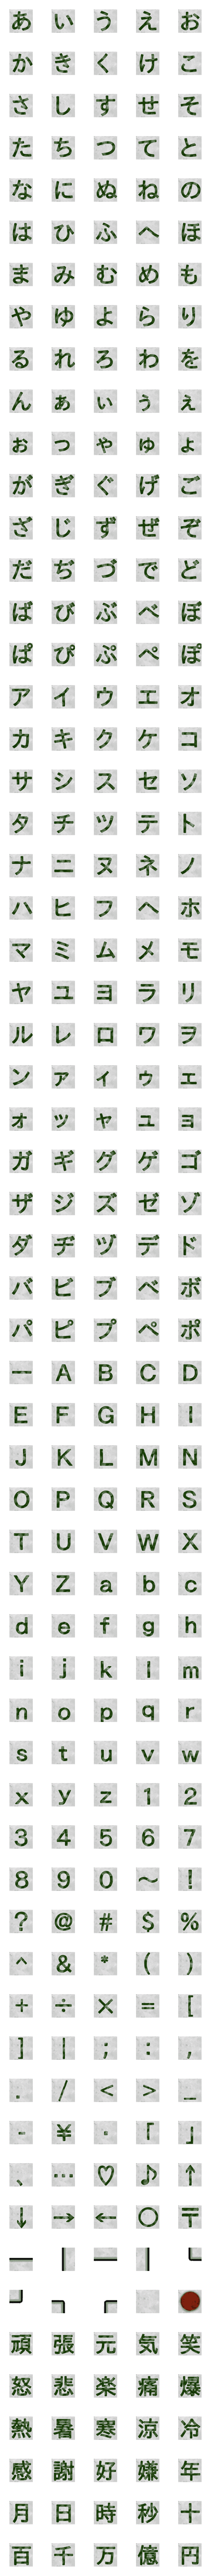 [LINE絵文字]海苔文字（梅干し付き）の画像一覧